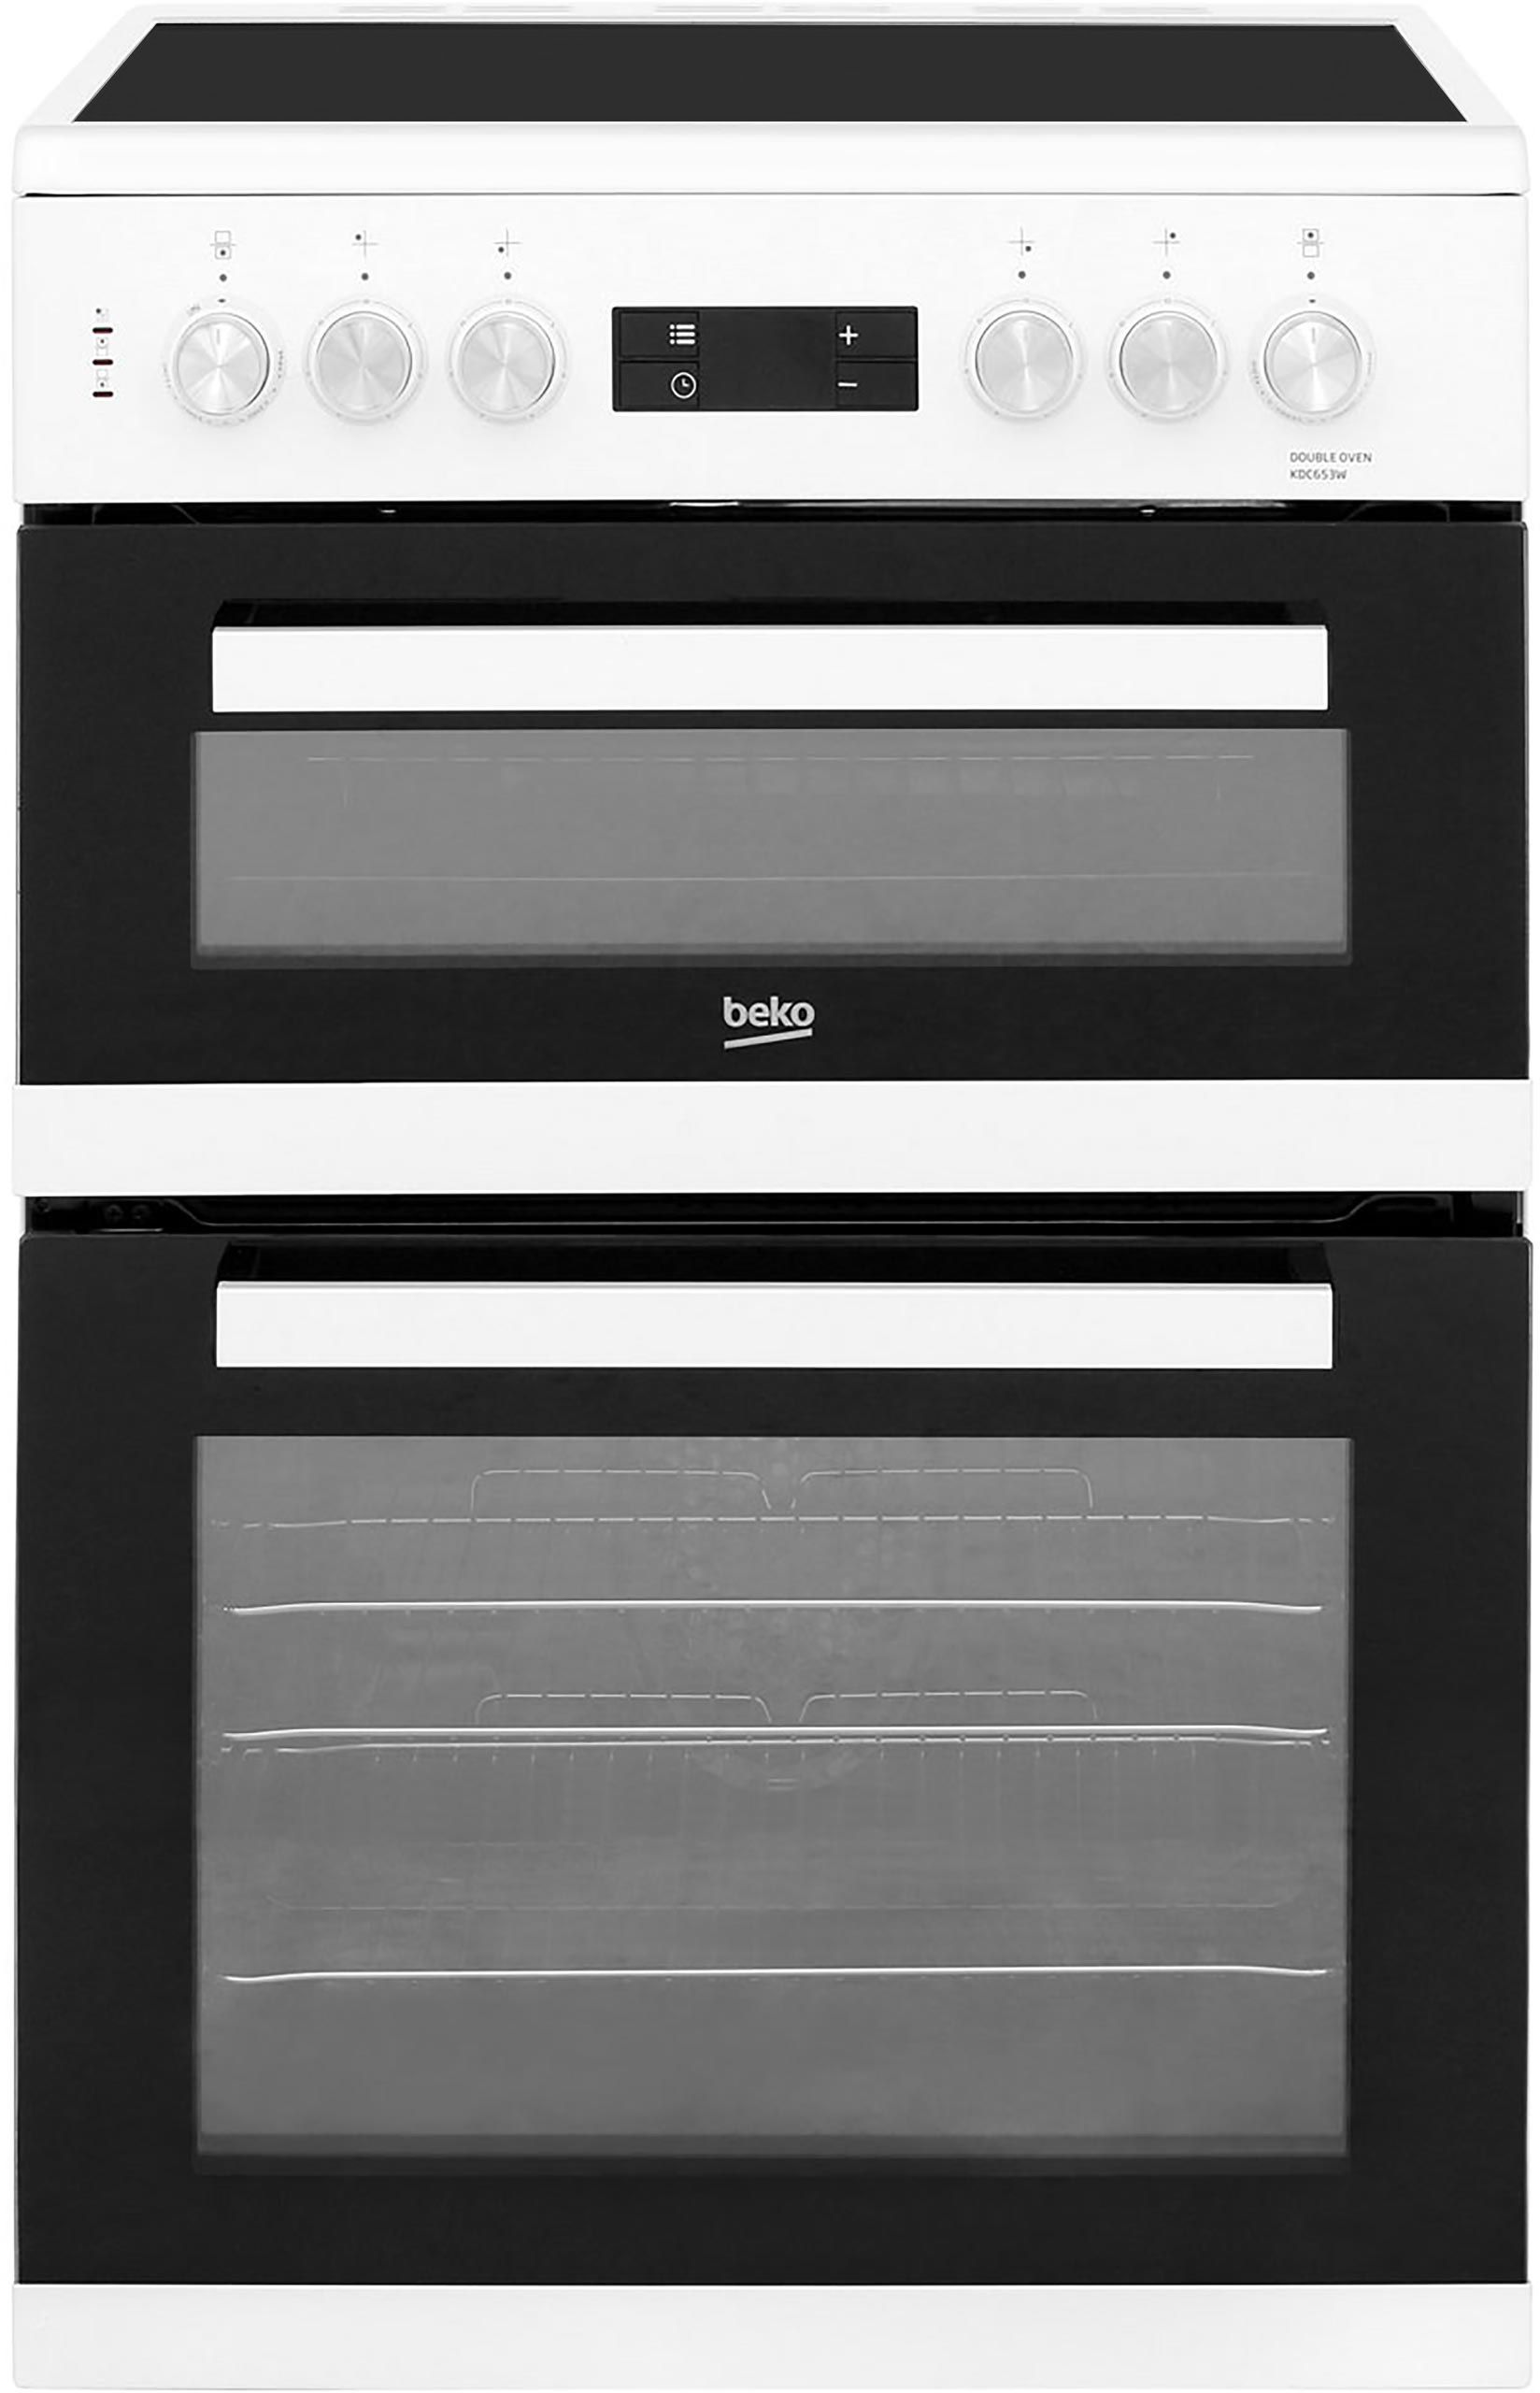 Beko KDC653W 60cm Electric Cooker with Ceramic Hob - White - A/A Rated, White